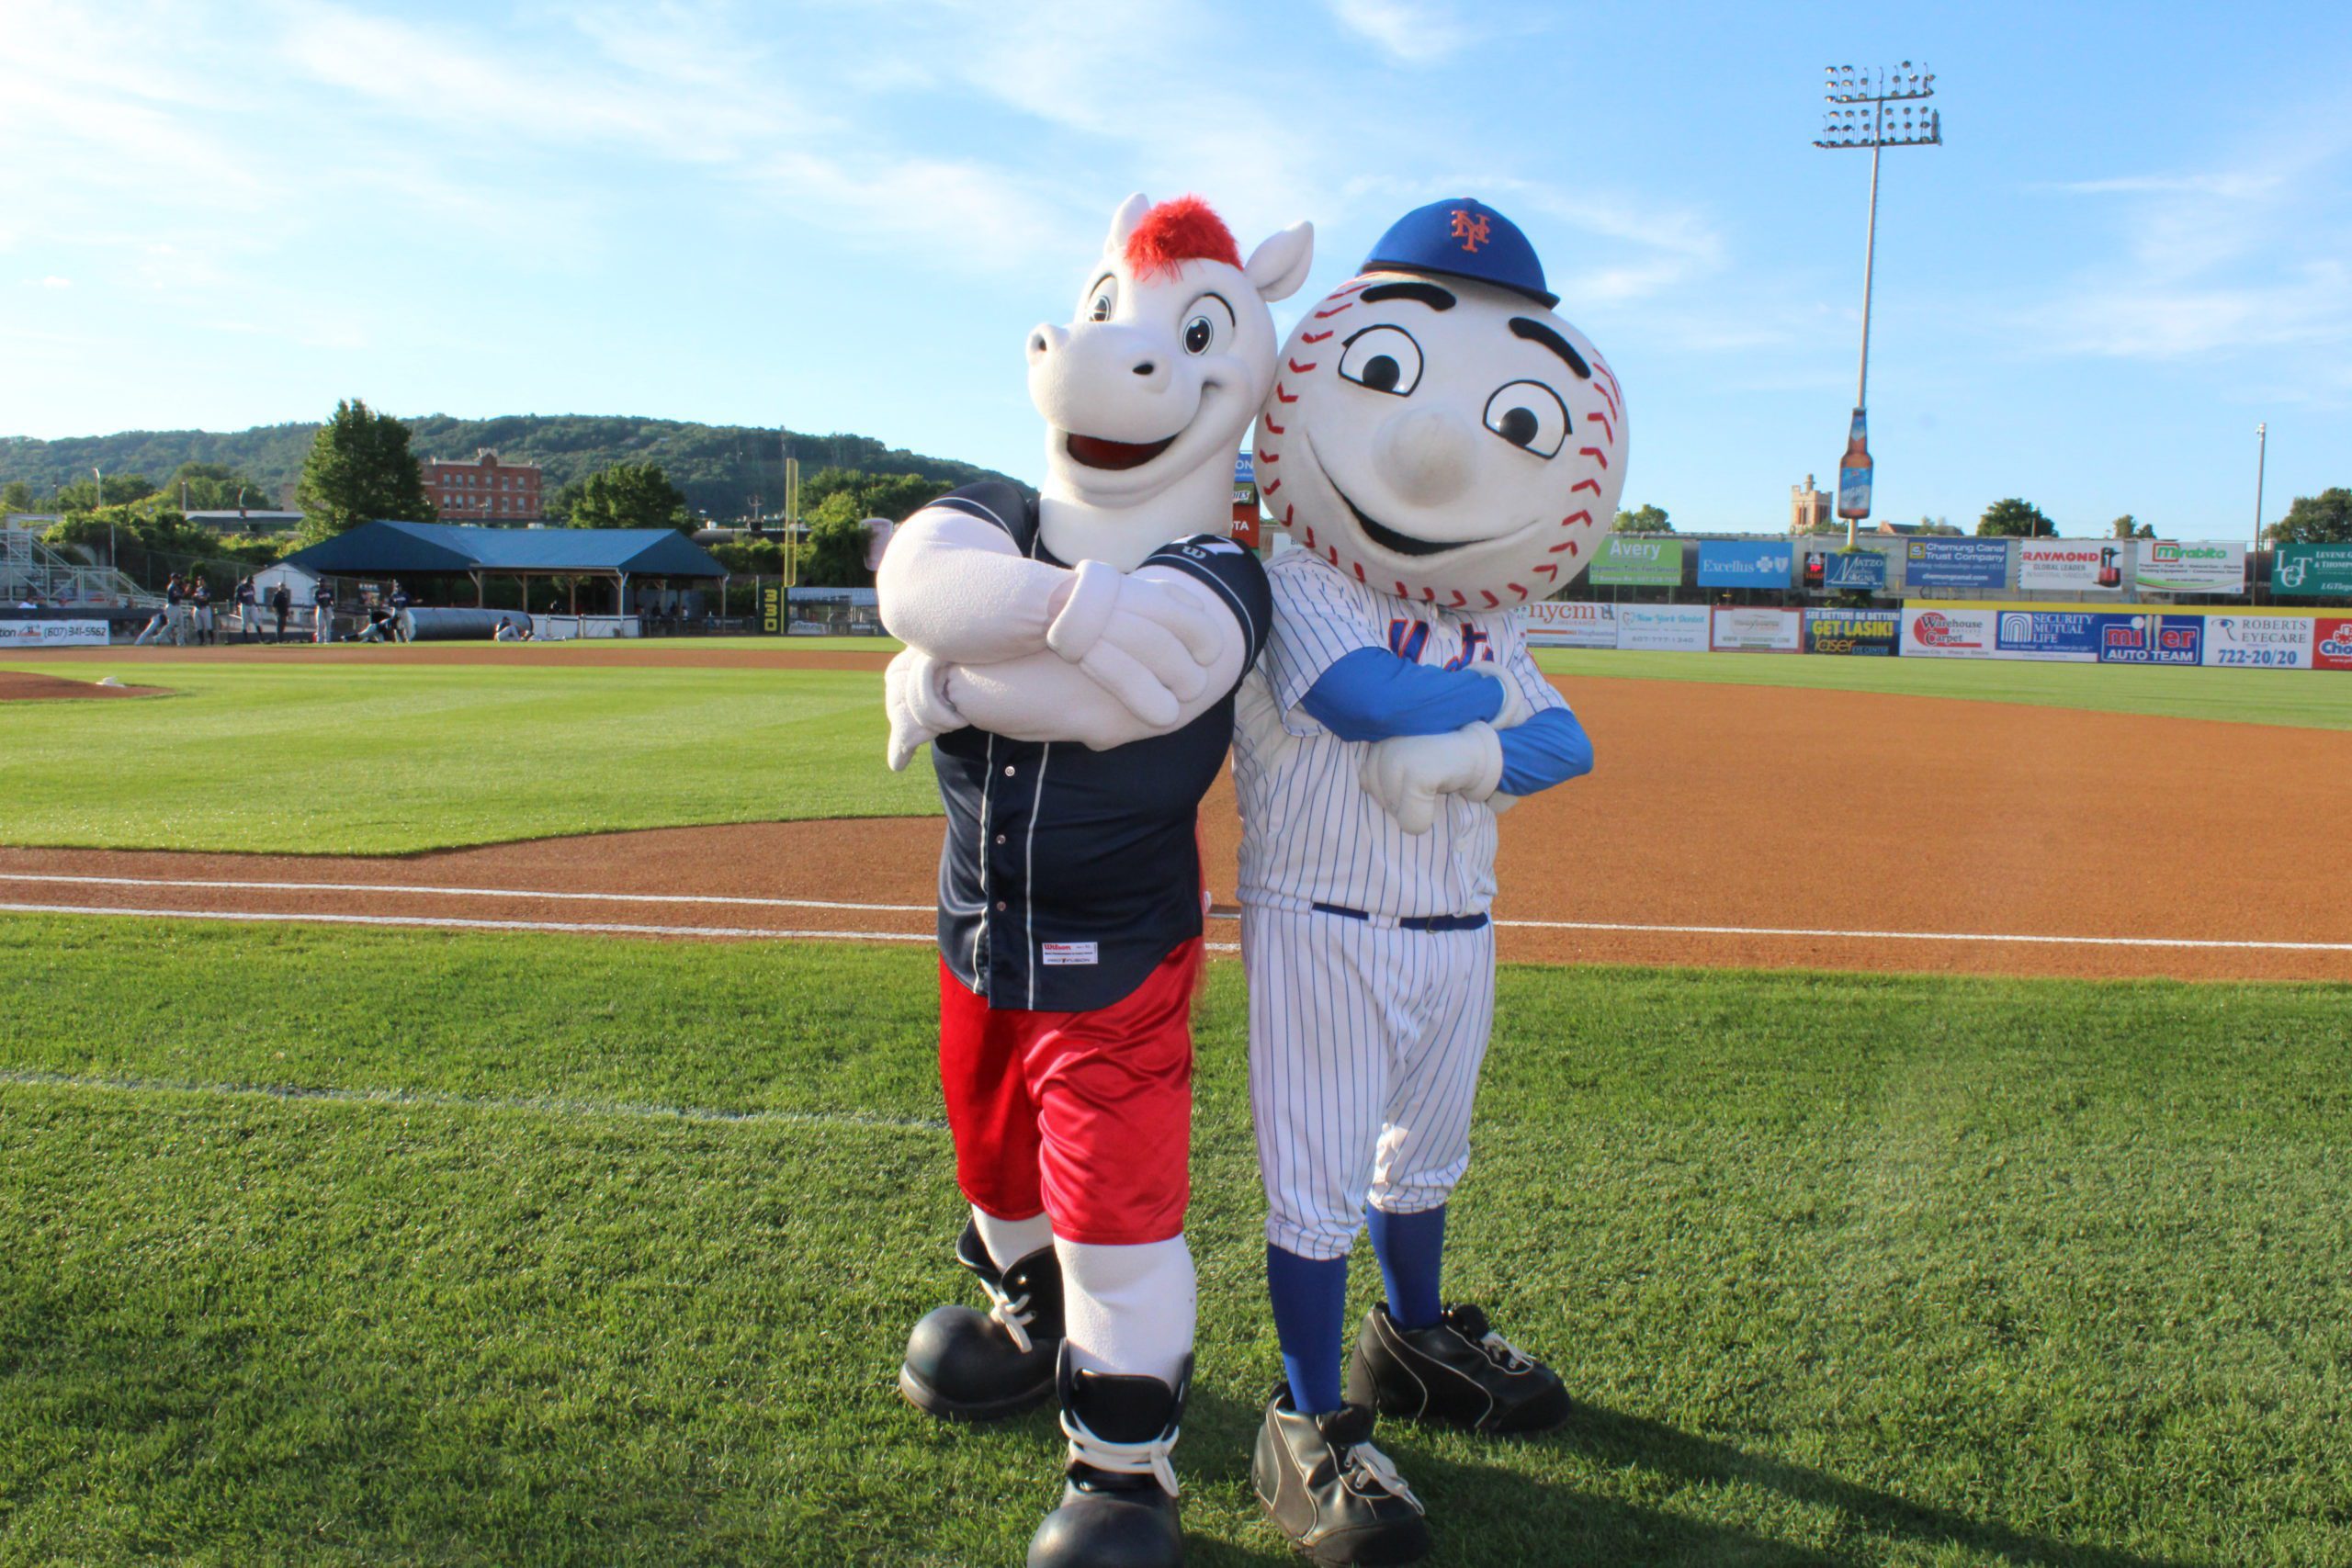 Rumble Ponies Begin The Season With a Movie-Themed Affair